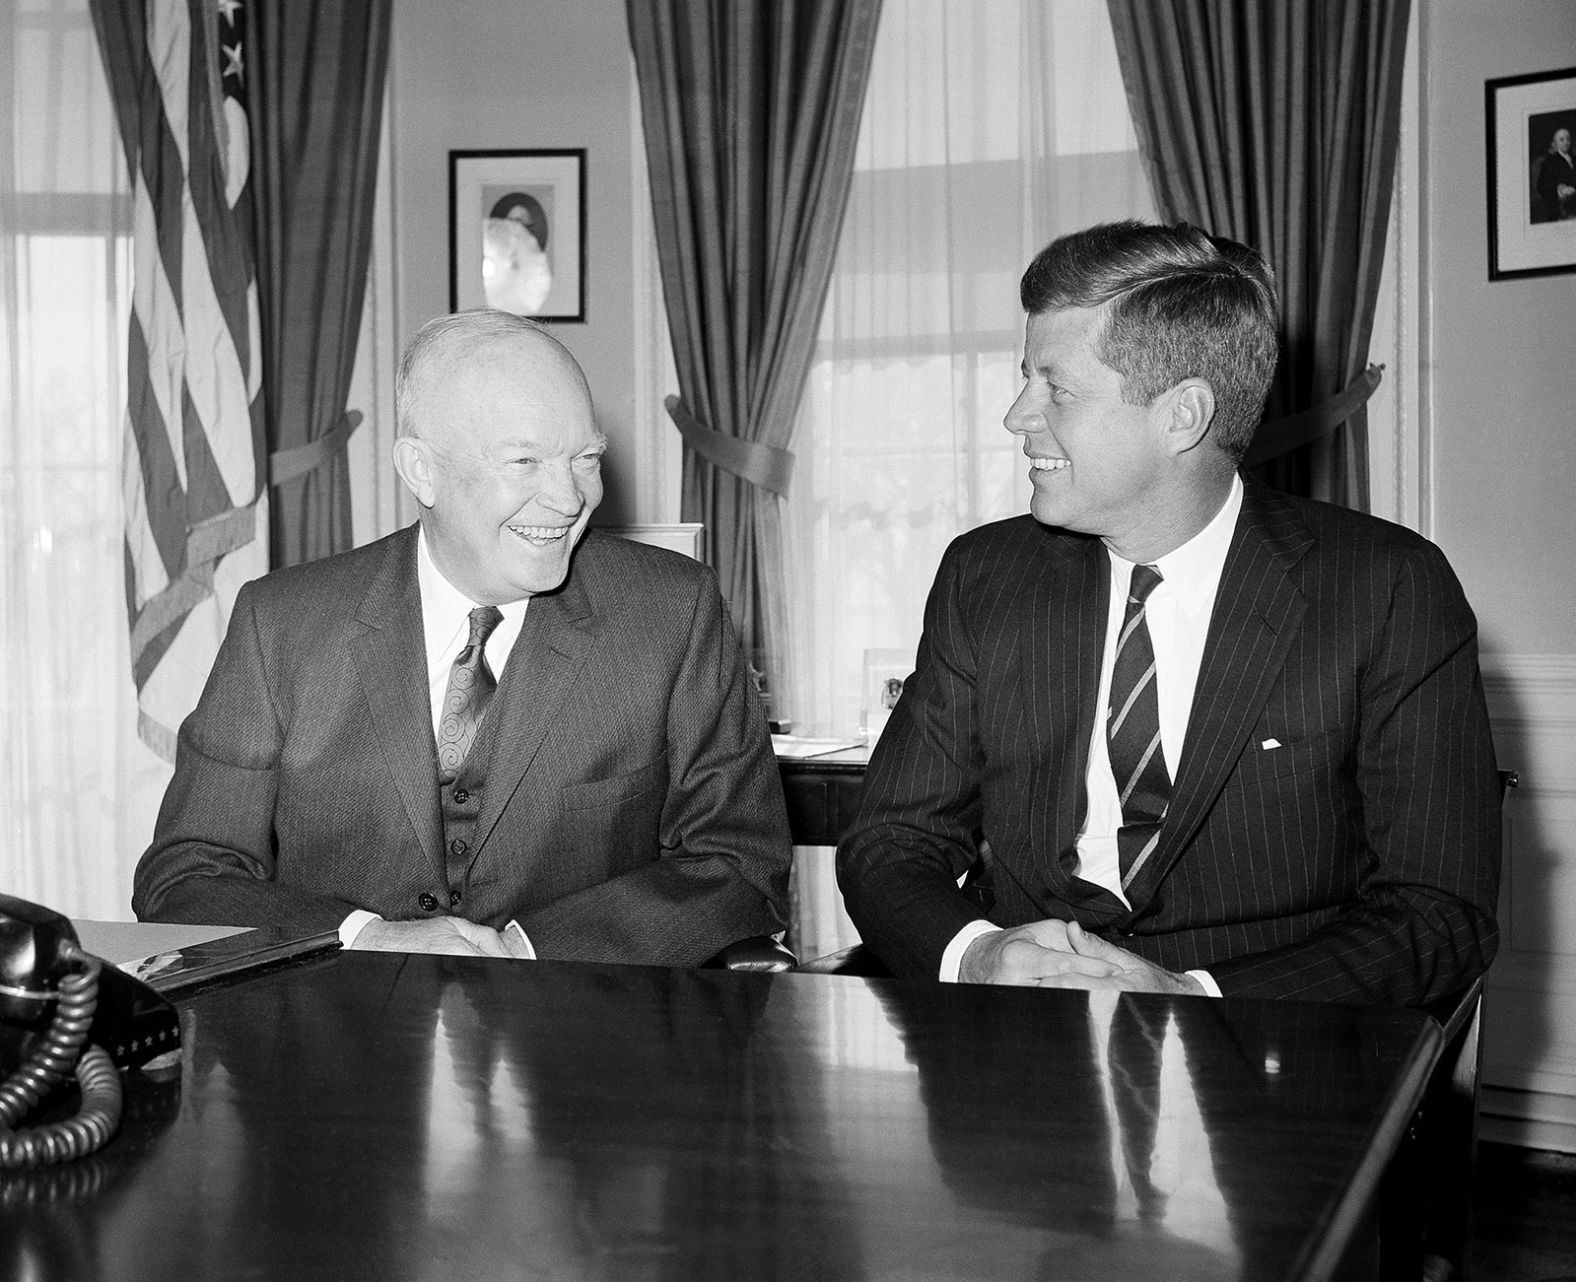 Kennedy, as president-elect, poses with President Dwight Eisenhower after they met at the White House in December 1960.